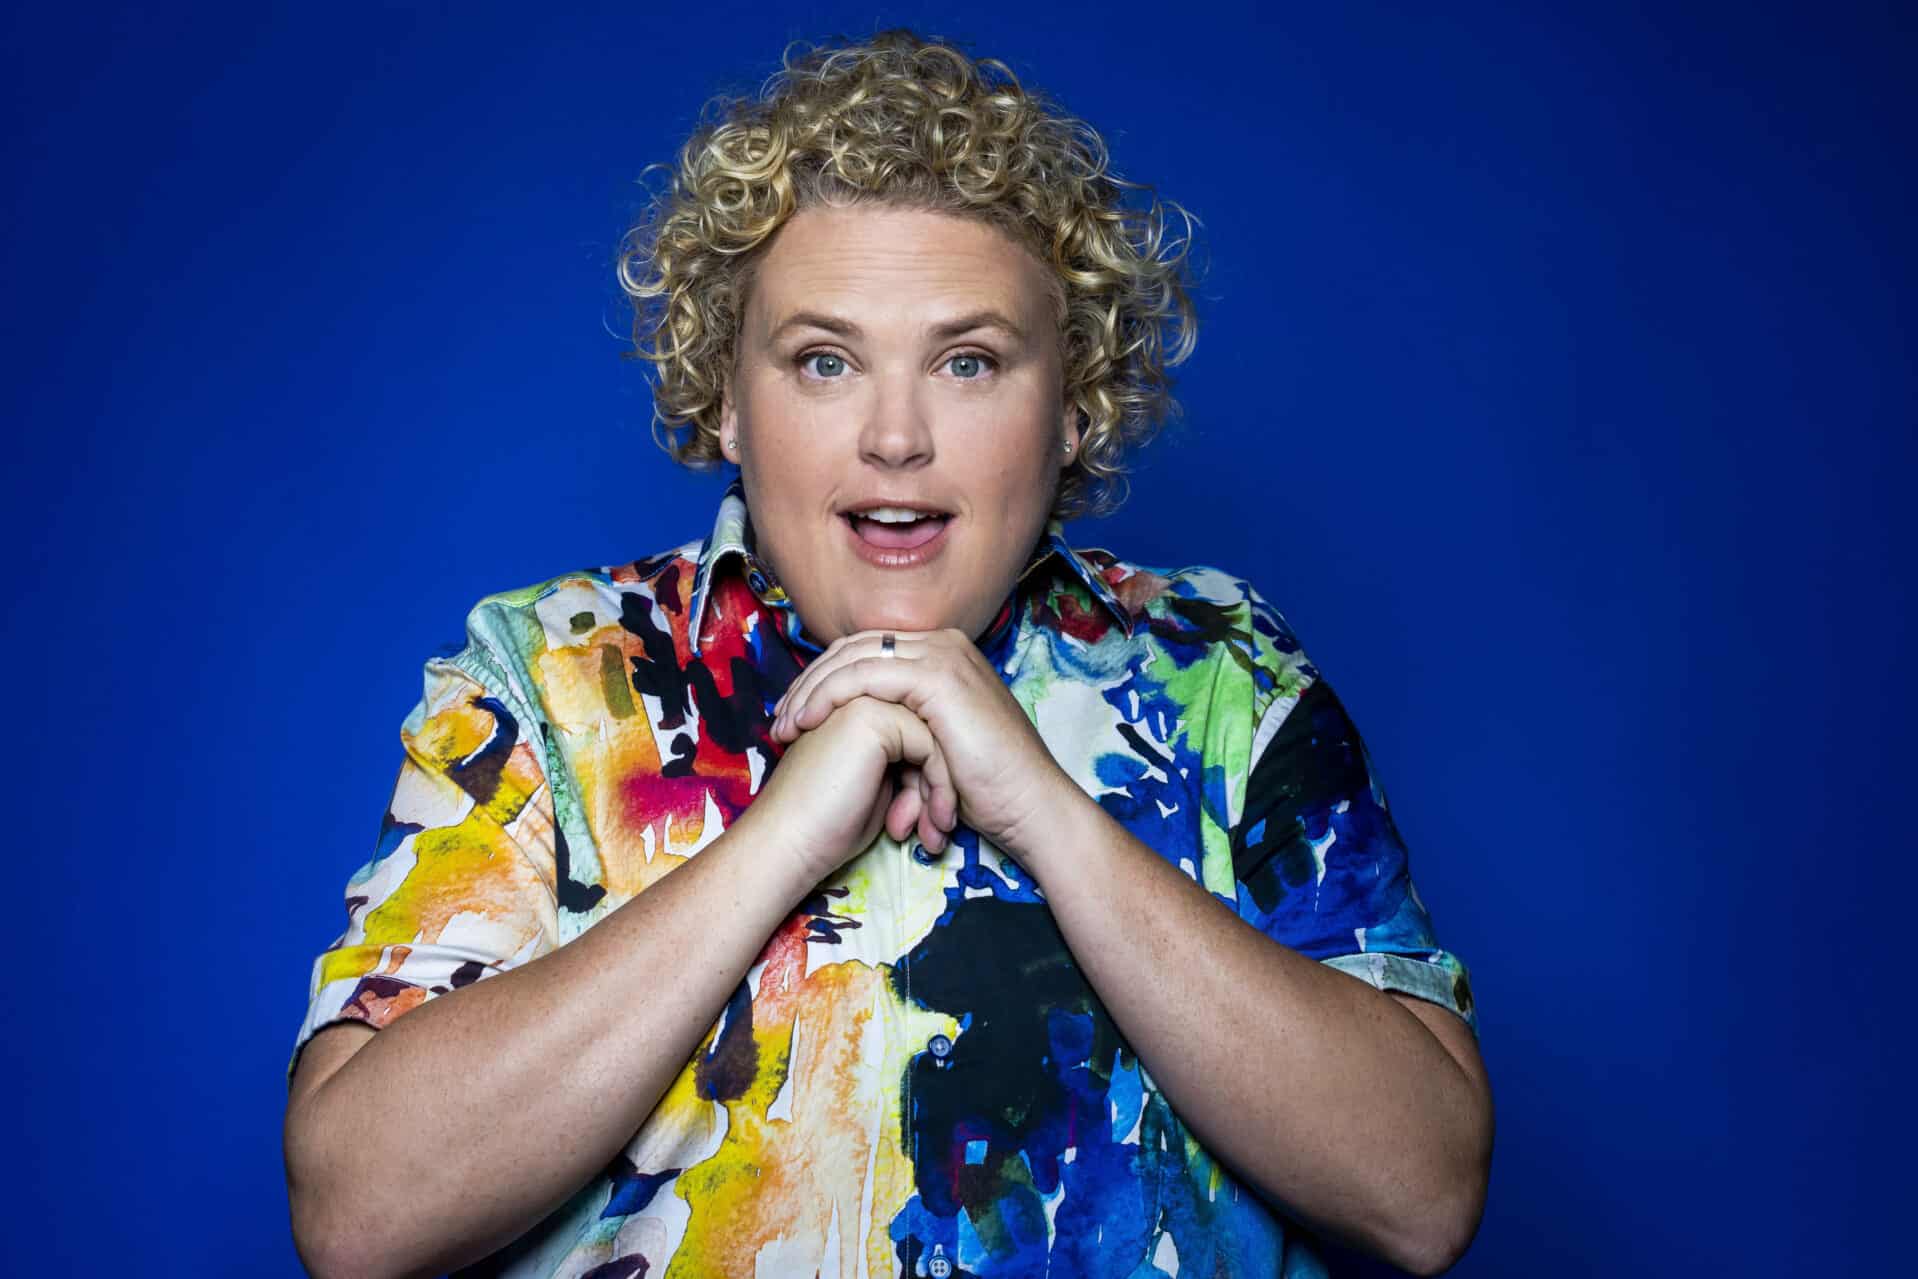 How rich is Fortune Feimster?